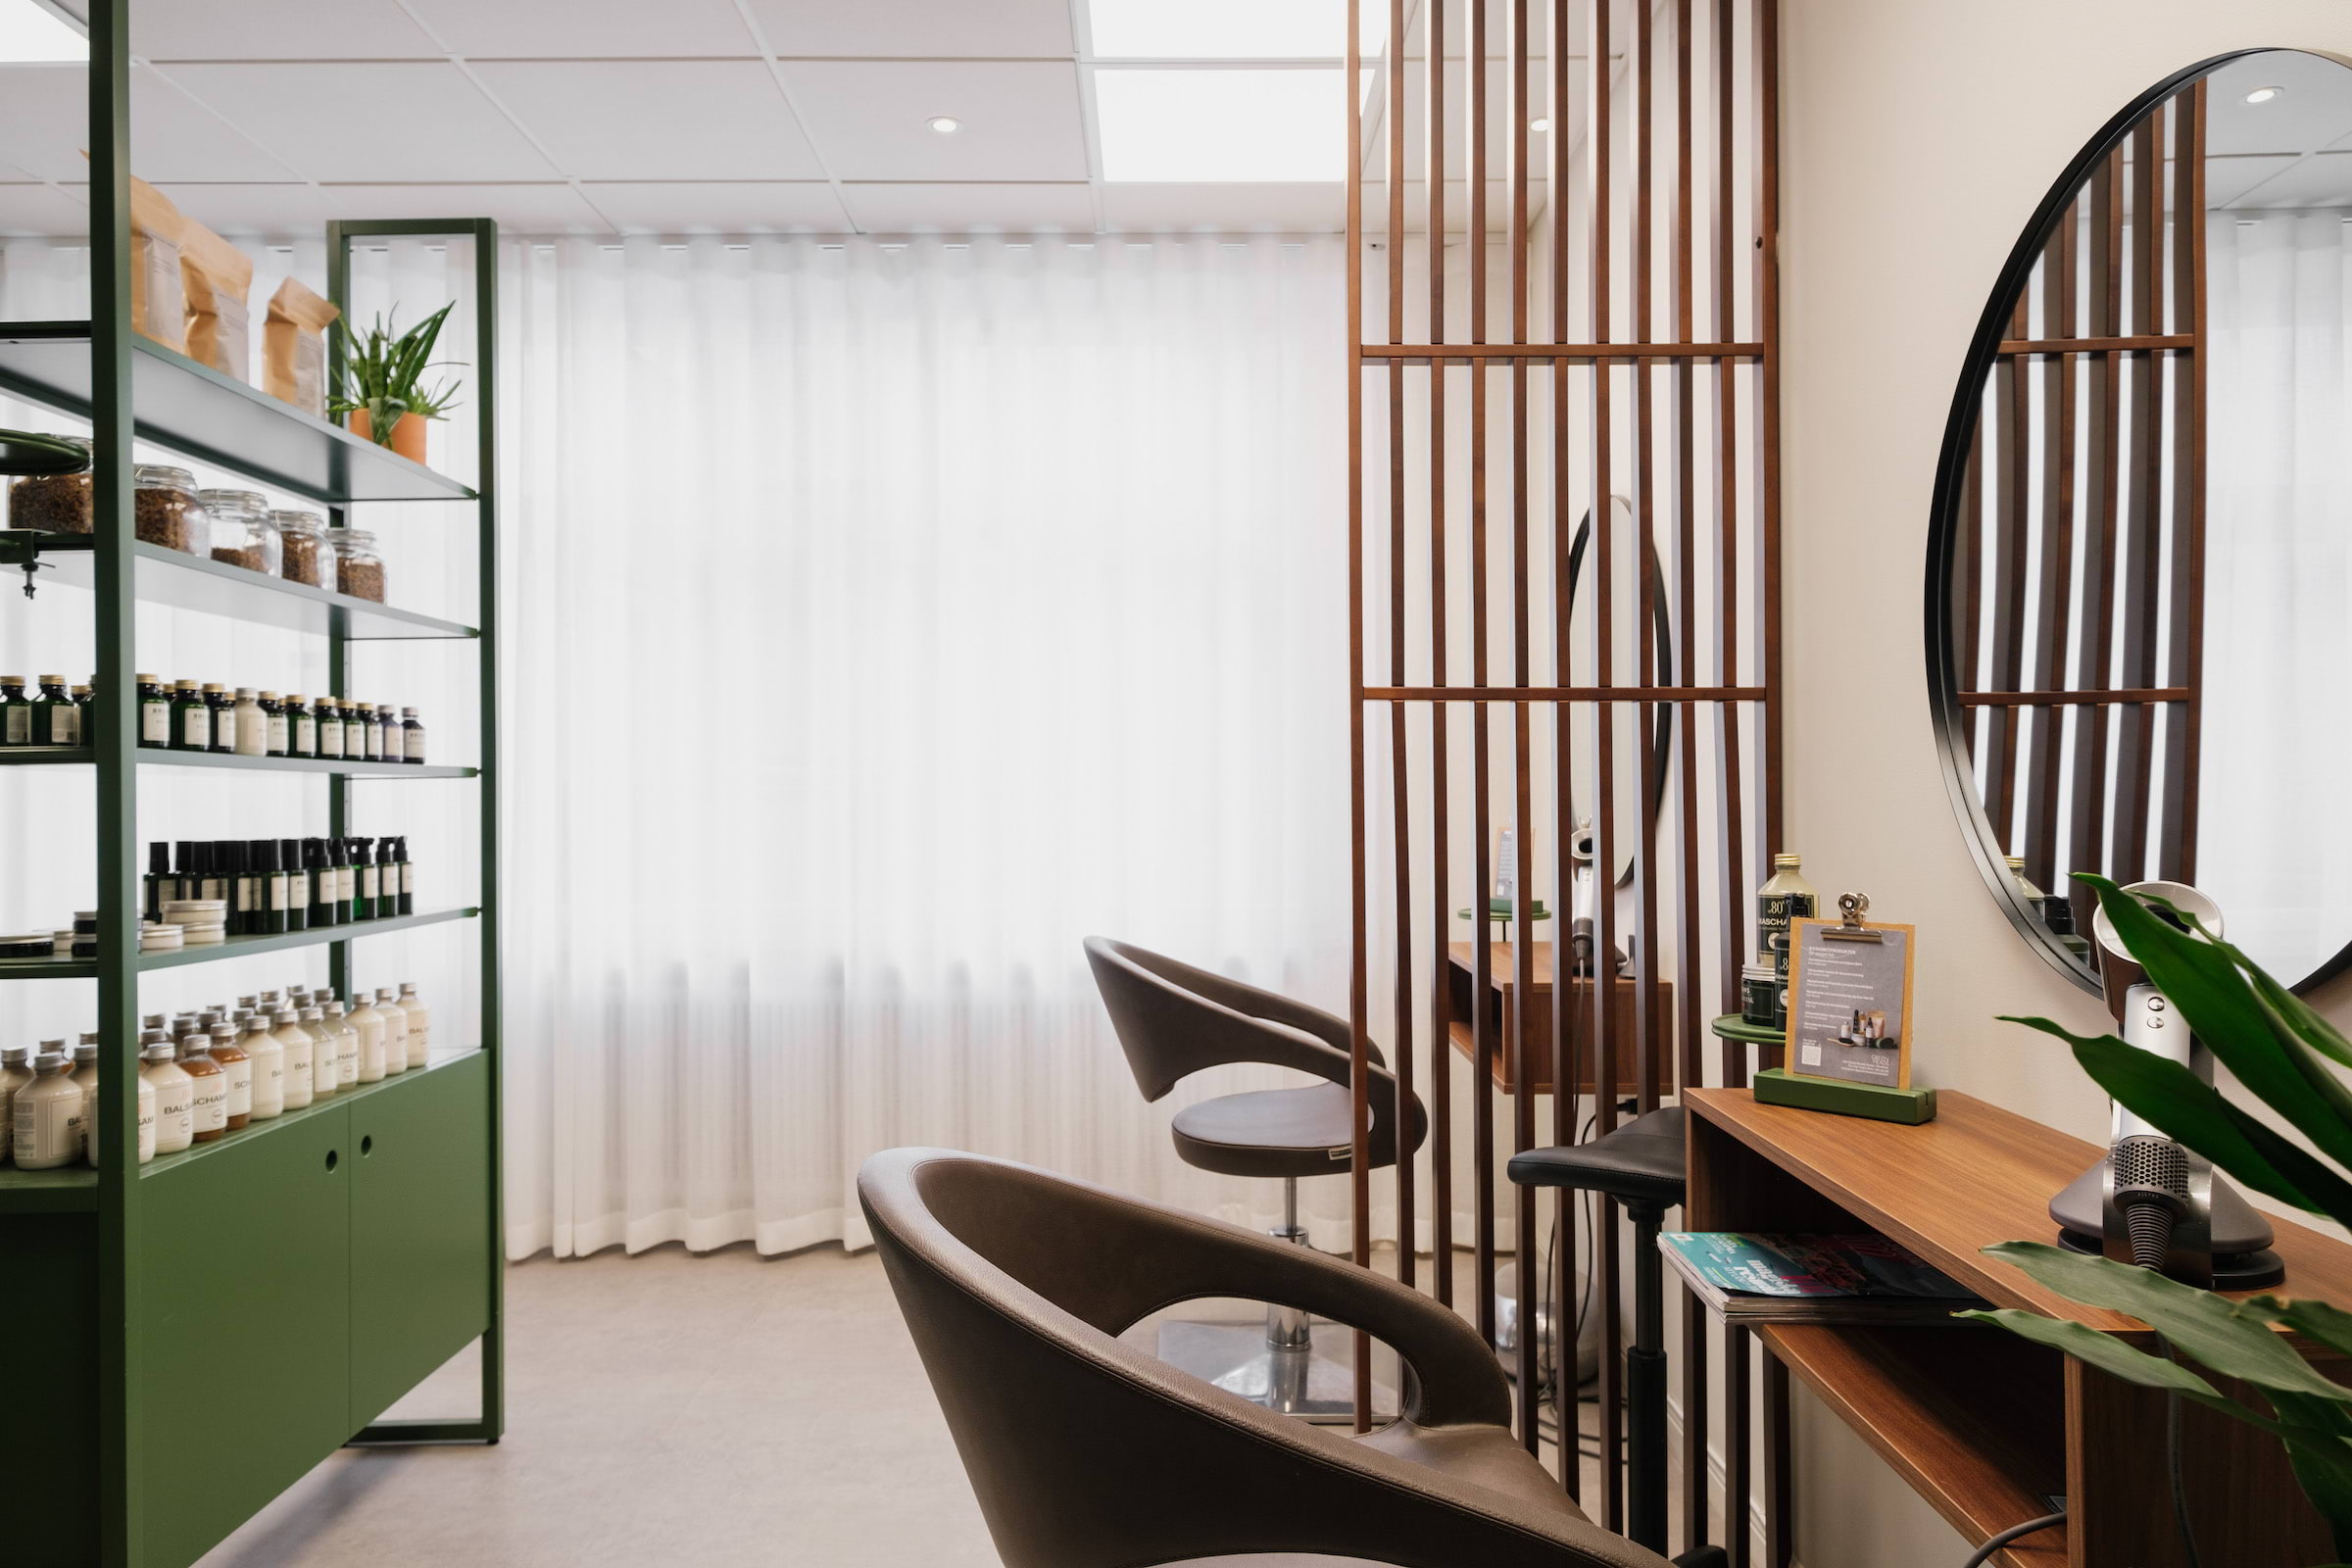 Where to find organic hairdressing salons in Stockholm